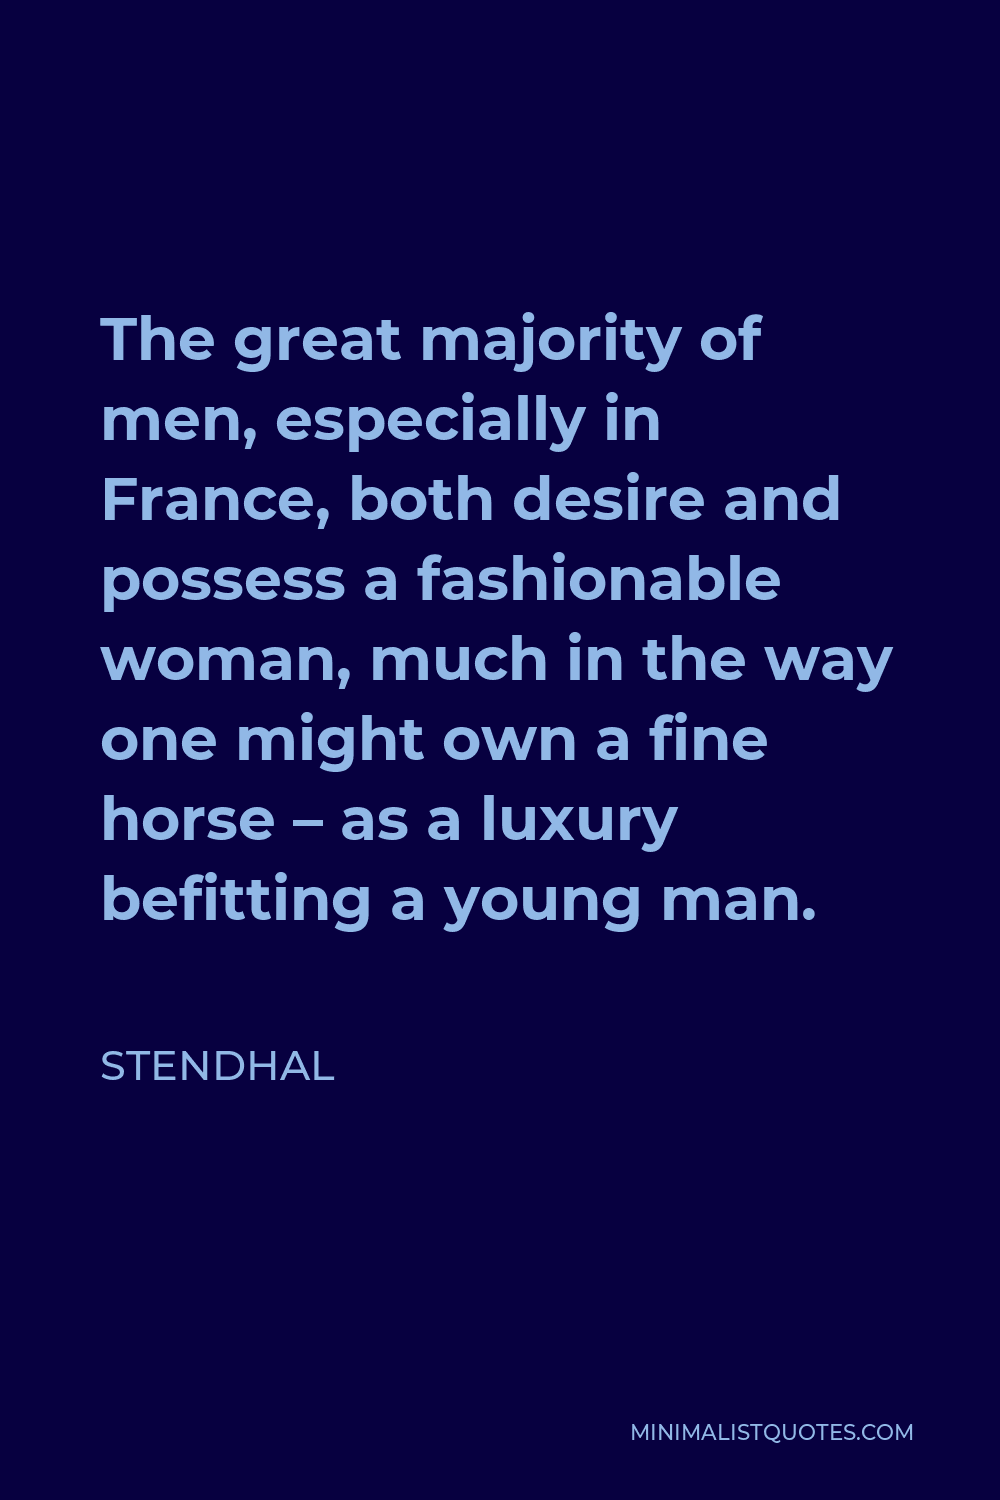 Stendhal Quote - The great majority of men, especially in France, both desire and possess a fashionable woman, much in the way one might own a fine horse – as a luxury befitting a young man.